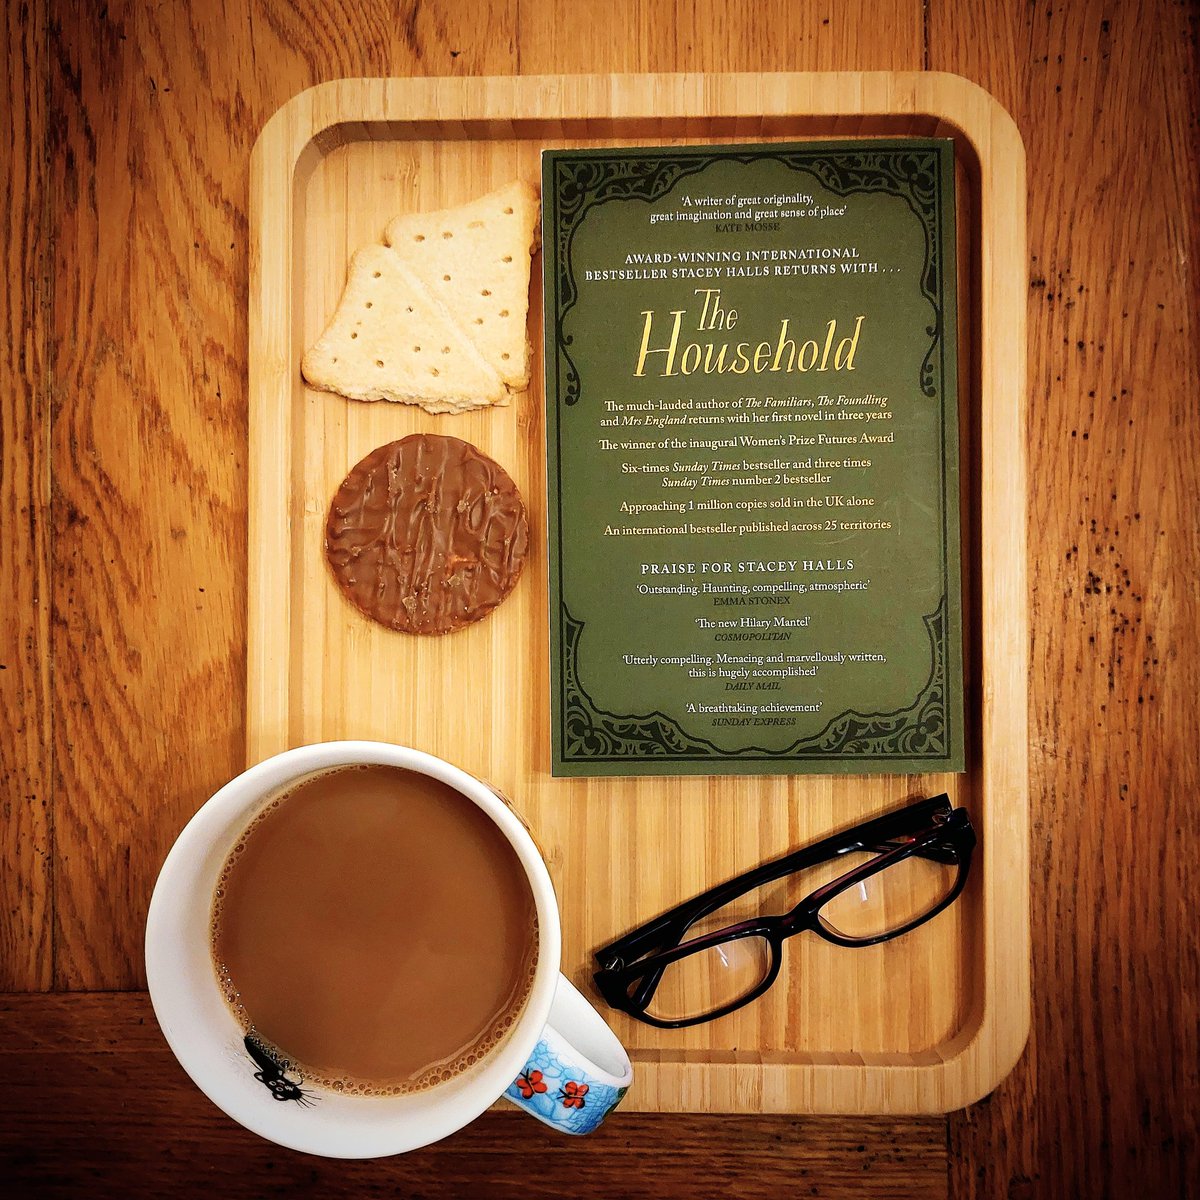 A mug of #BuildersBrew a couple of biscuits and a darned good read - the brand new stunner from @stacey_halls #TheHousehold

I've loved all of Stacey's books and this might be my favourite one yet!

Out from #ManillaPress @bonnierbooks_uk 11th April. 💛

#SaturdayVibes